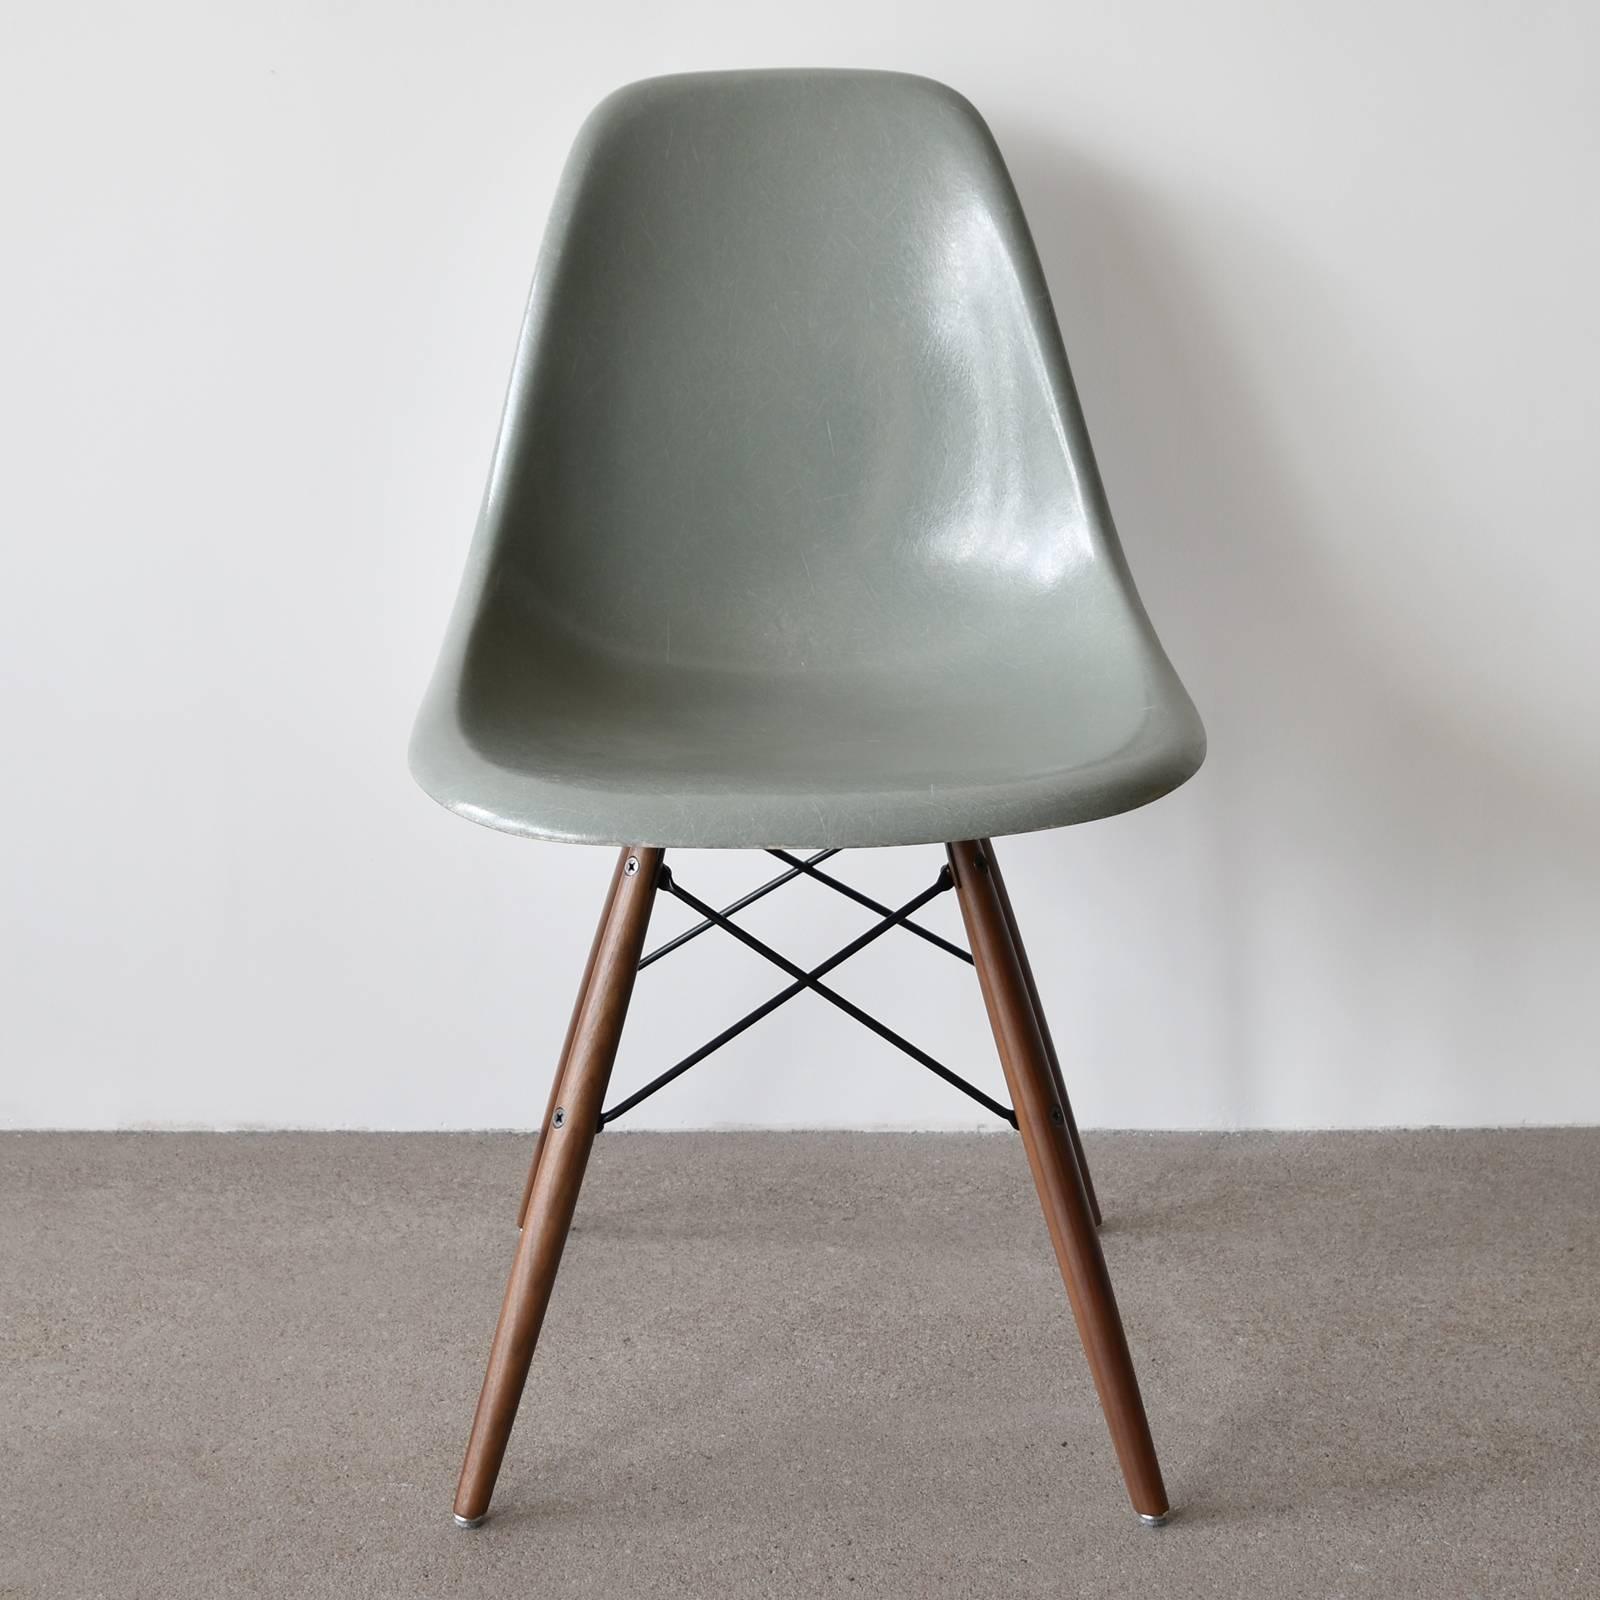 Beautiful iconic DSW chair in the color: Sea Foam Green. Shell side chair is in very good condition with only slight traces of use. Replaced shock mounts which guarantee save usability for the next decades. New oak or walnut dowel base. Each chair